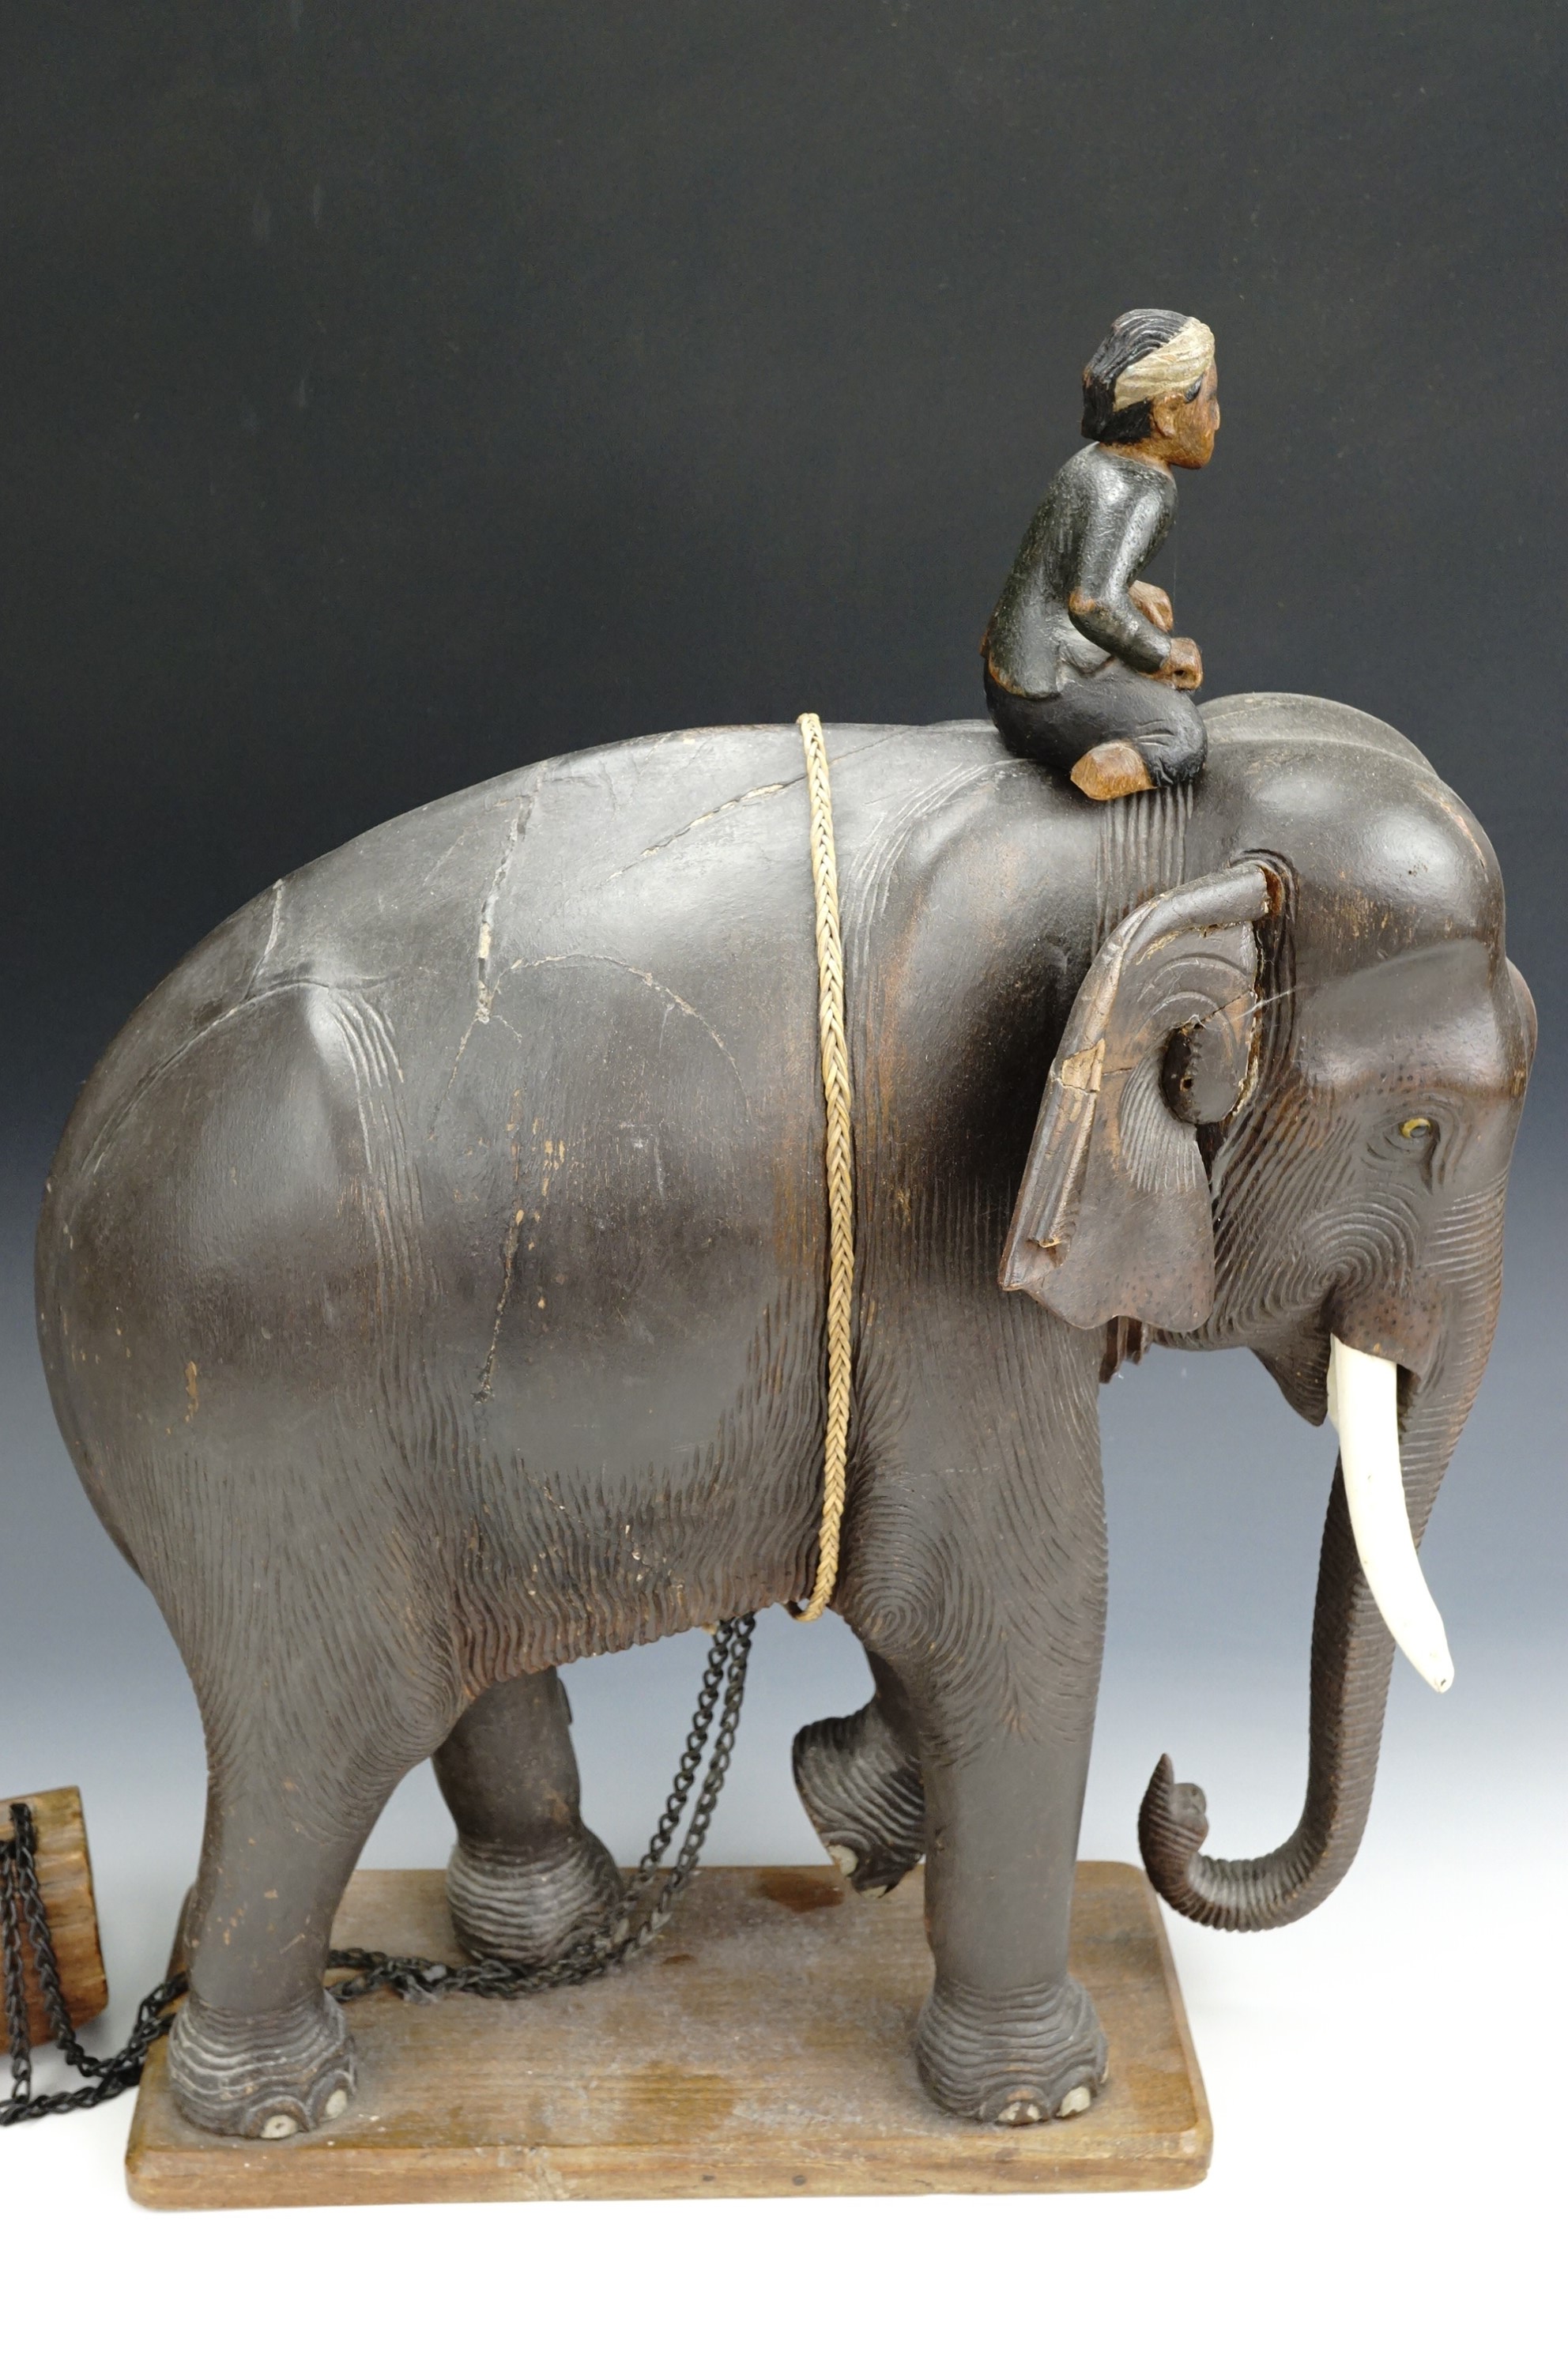 A 1930s Malayan elephant sculpture of carved wood, depicting a naturalistically modelled elephant - Image 5 of 8